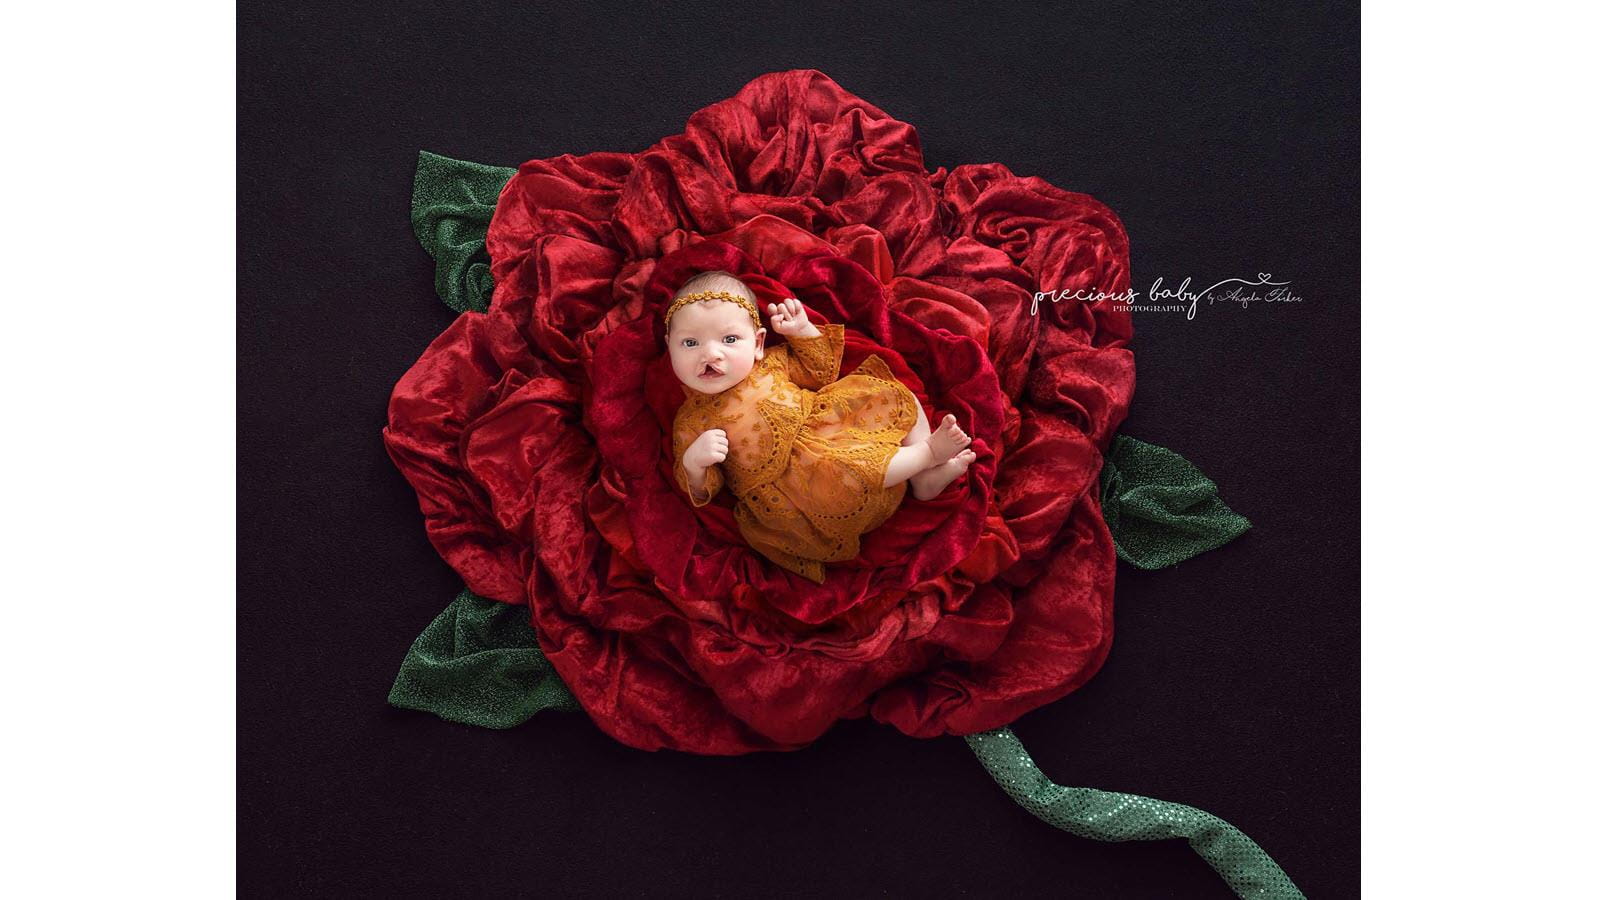 Baby born with a cleft lip sits in the center of a large red rose